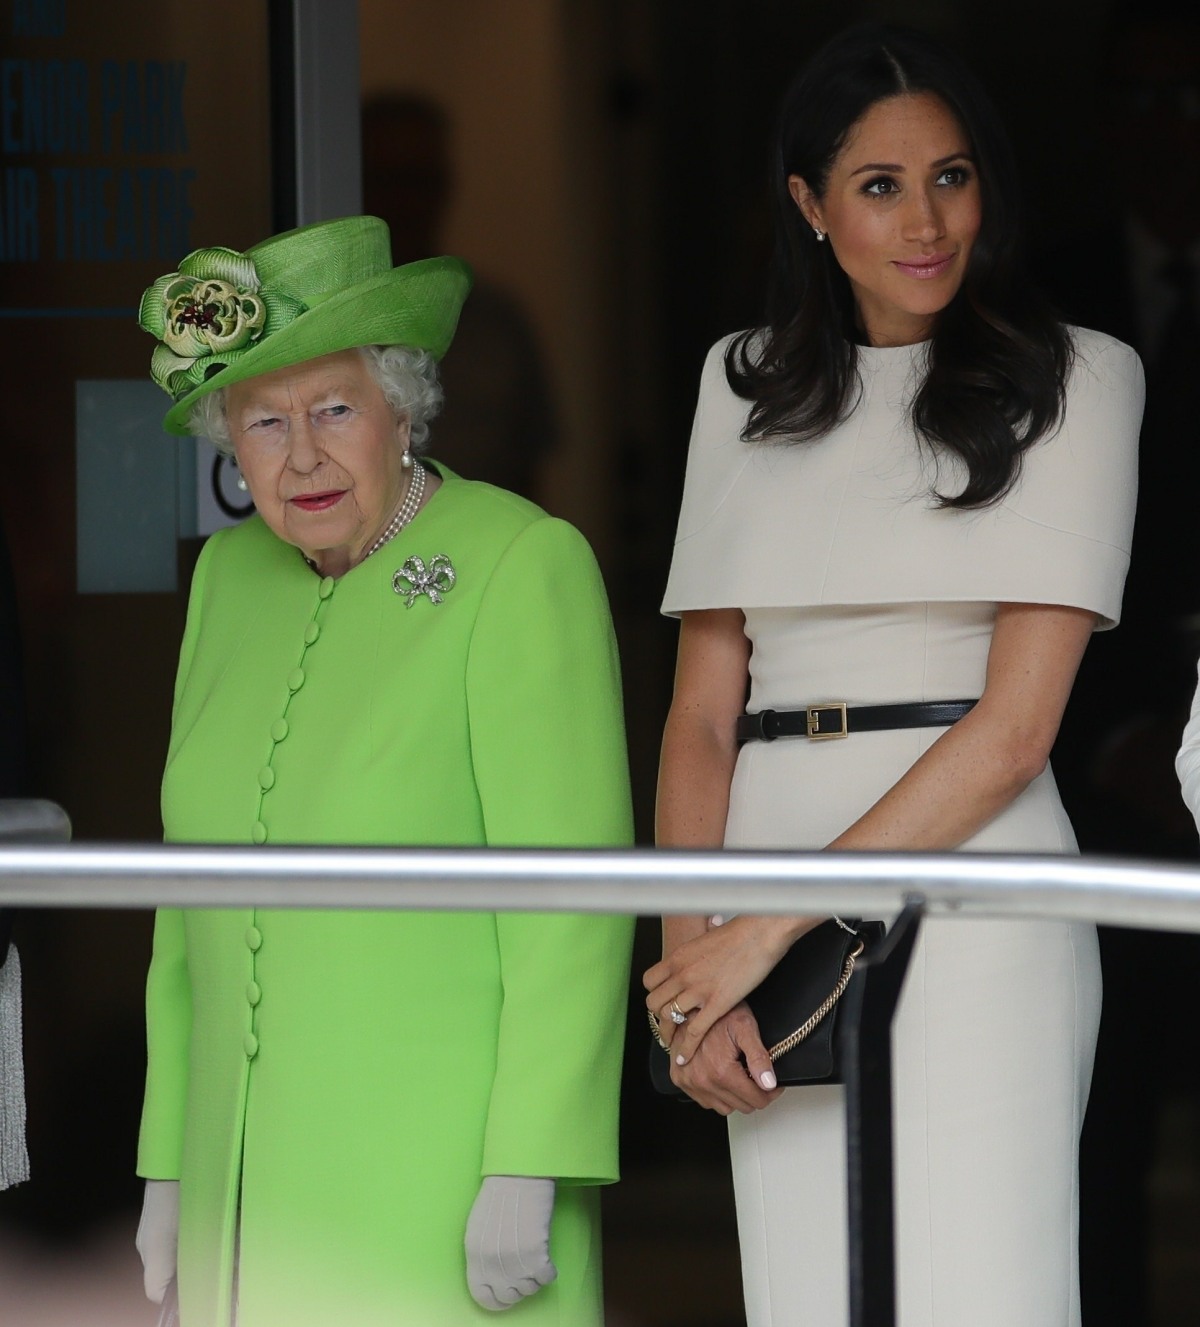 The Duchess of Sussex undertakes her first official engagement with Queen Elizabeth II